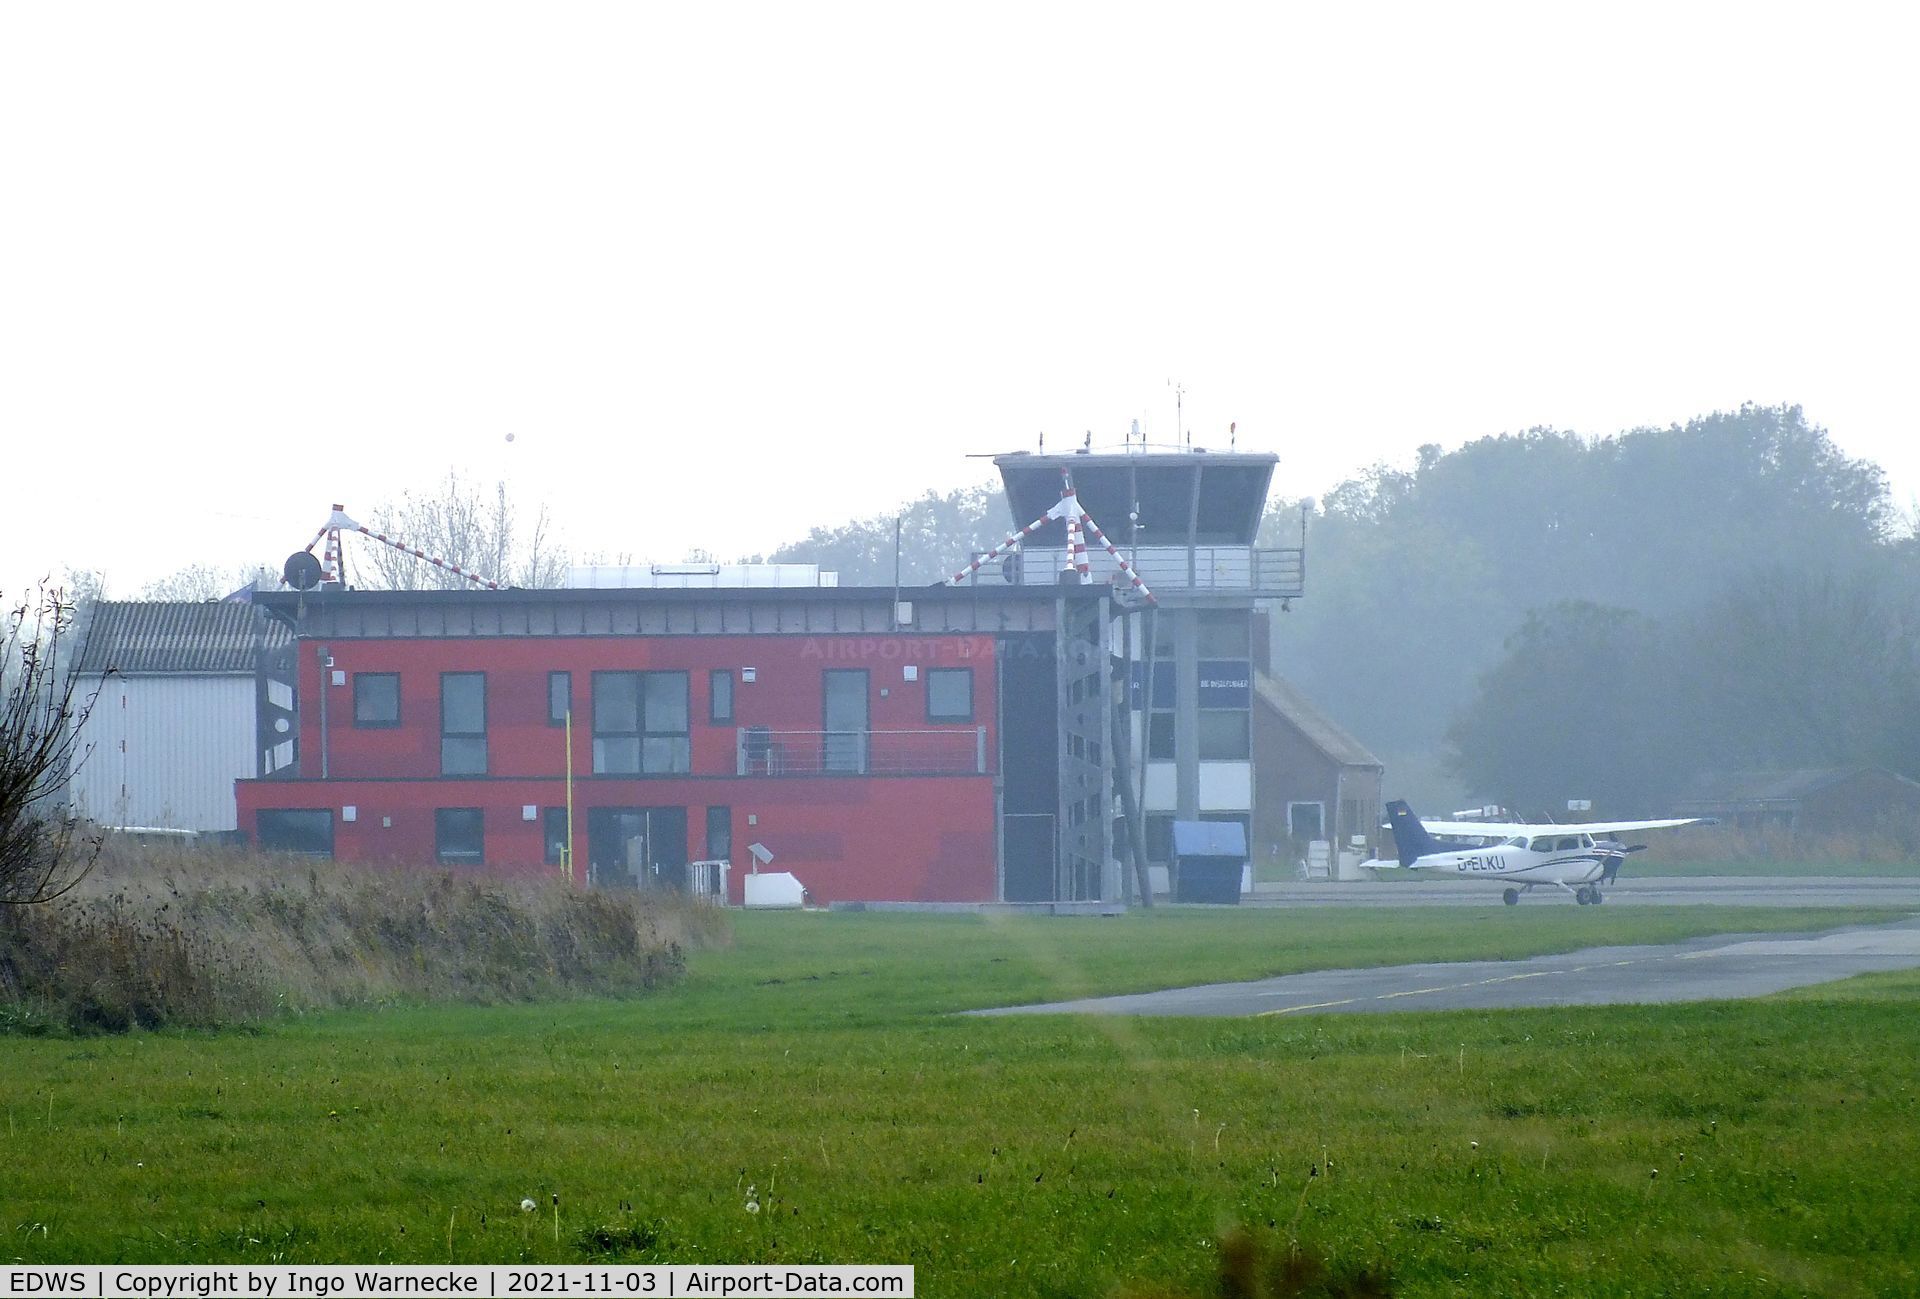 EDWS Airport - Norden-Norddeich airfield buildings seen from a distance